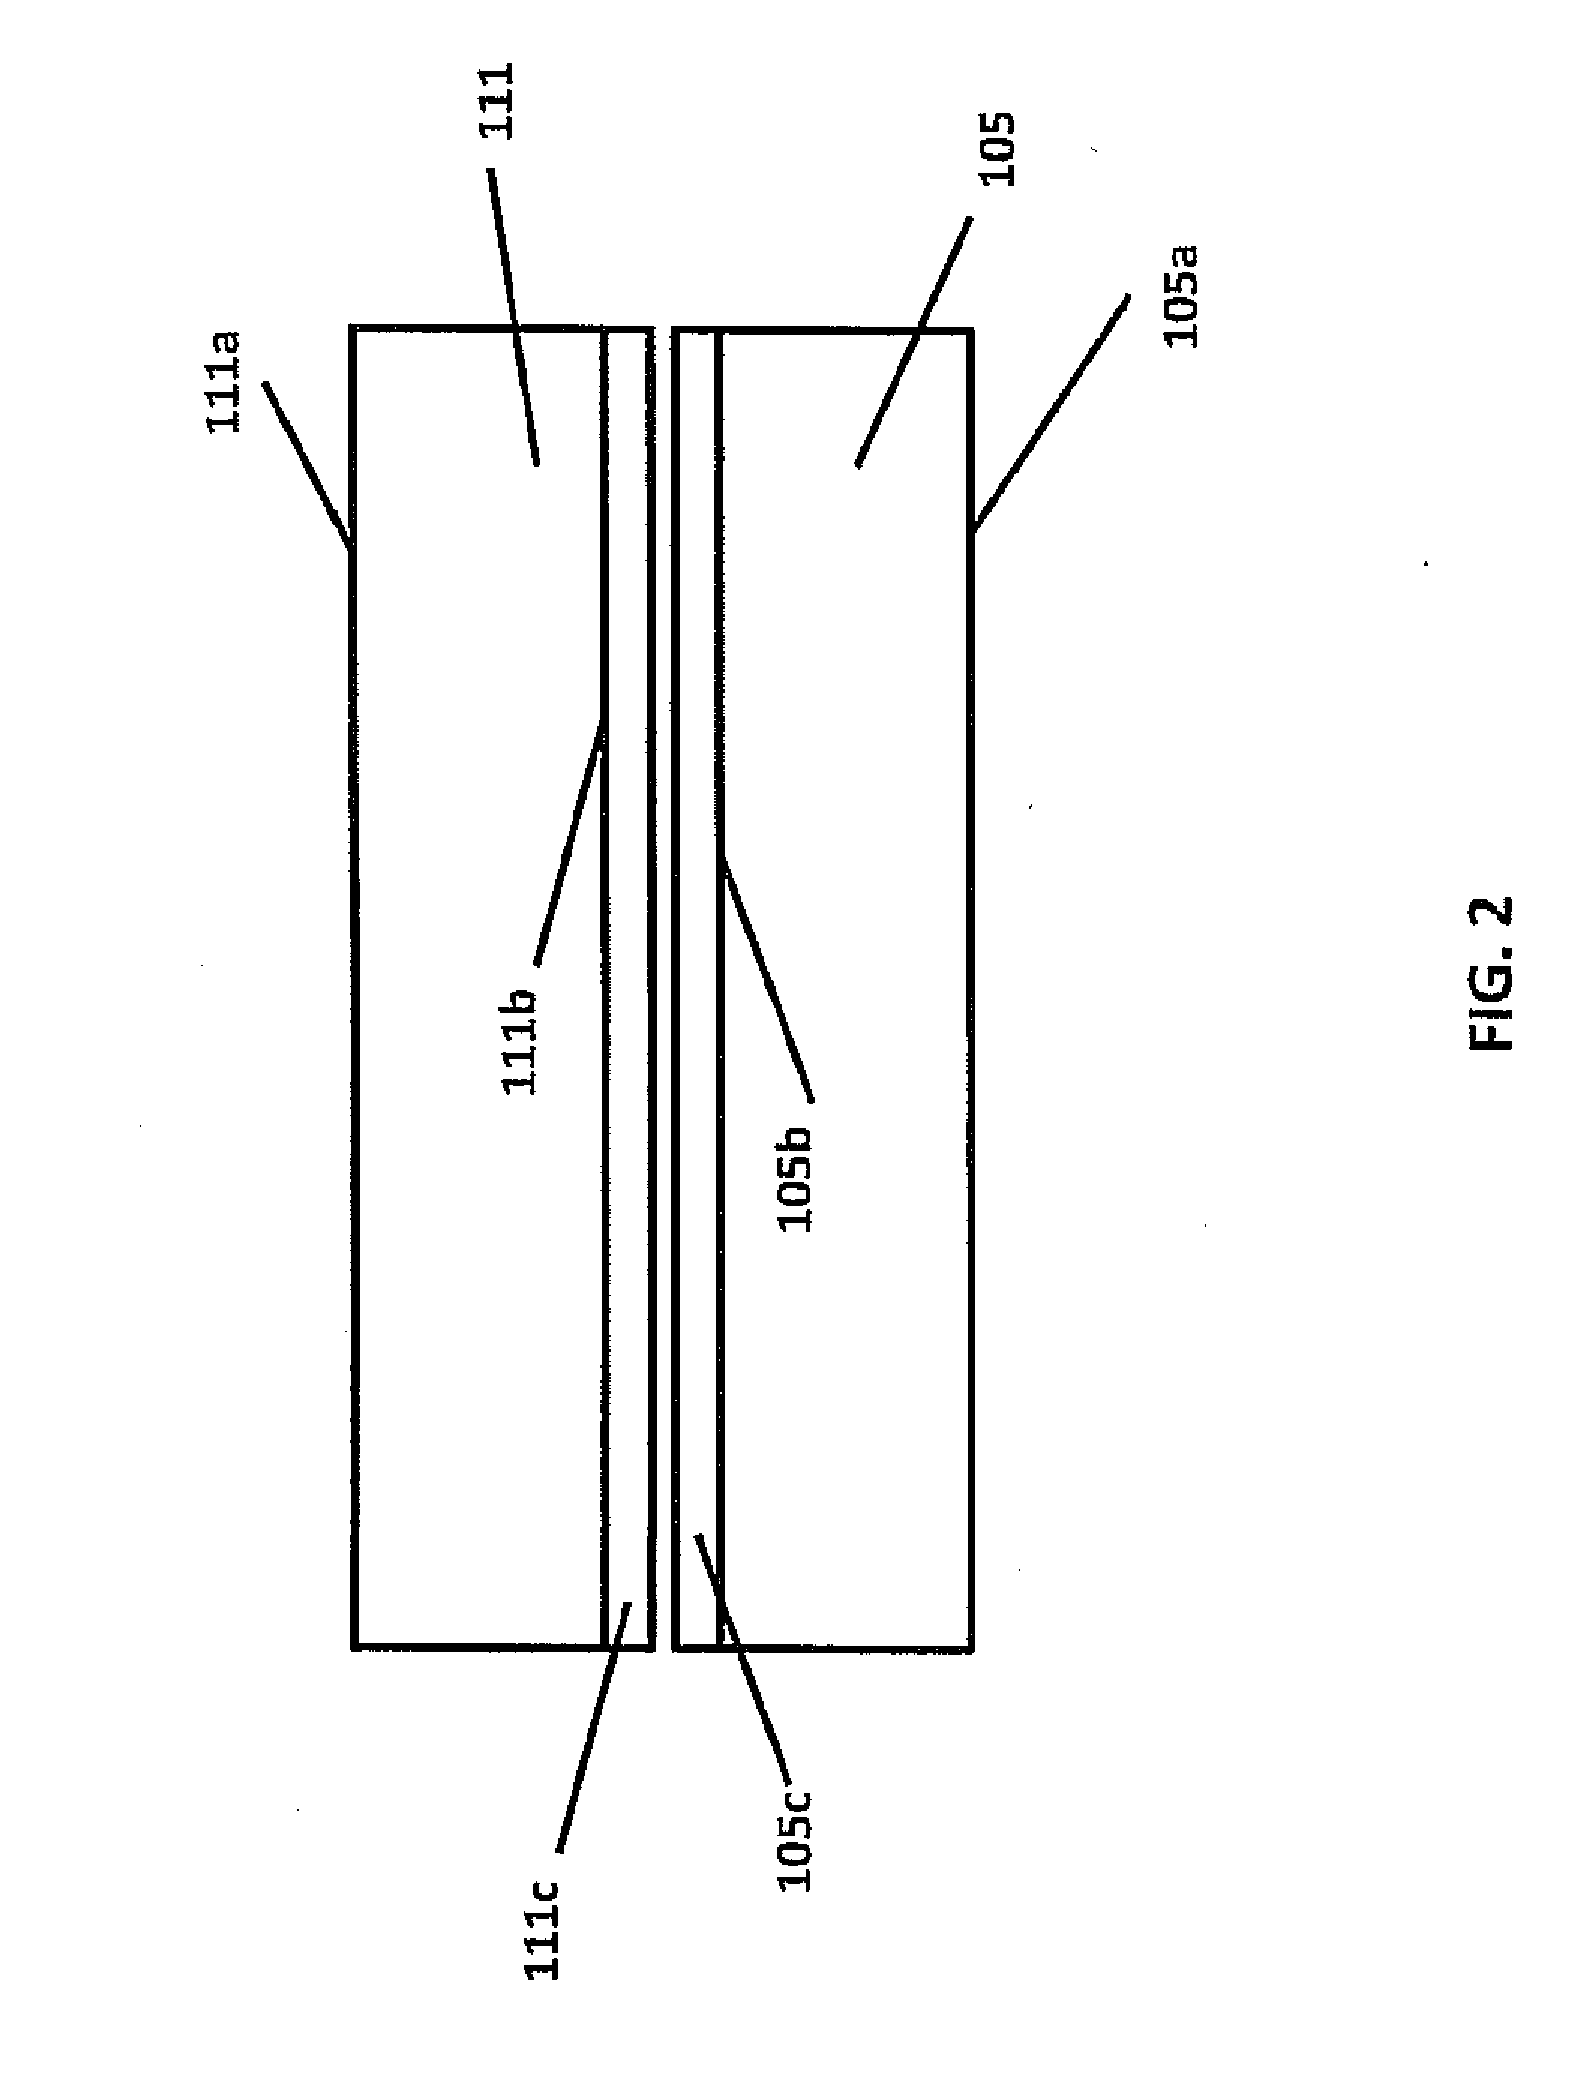 Sputtering target temperature control utilizing layers having predetermined emissivity coefficients